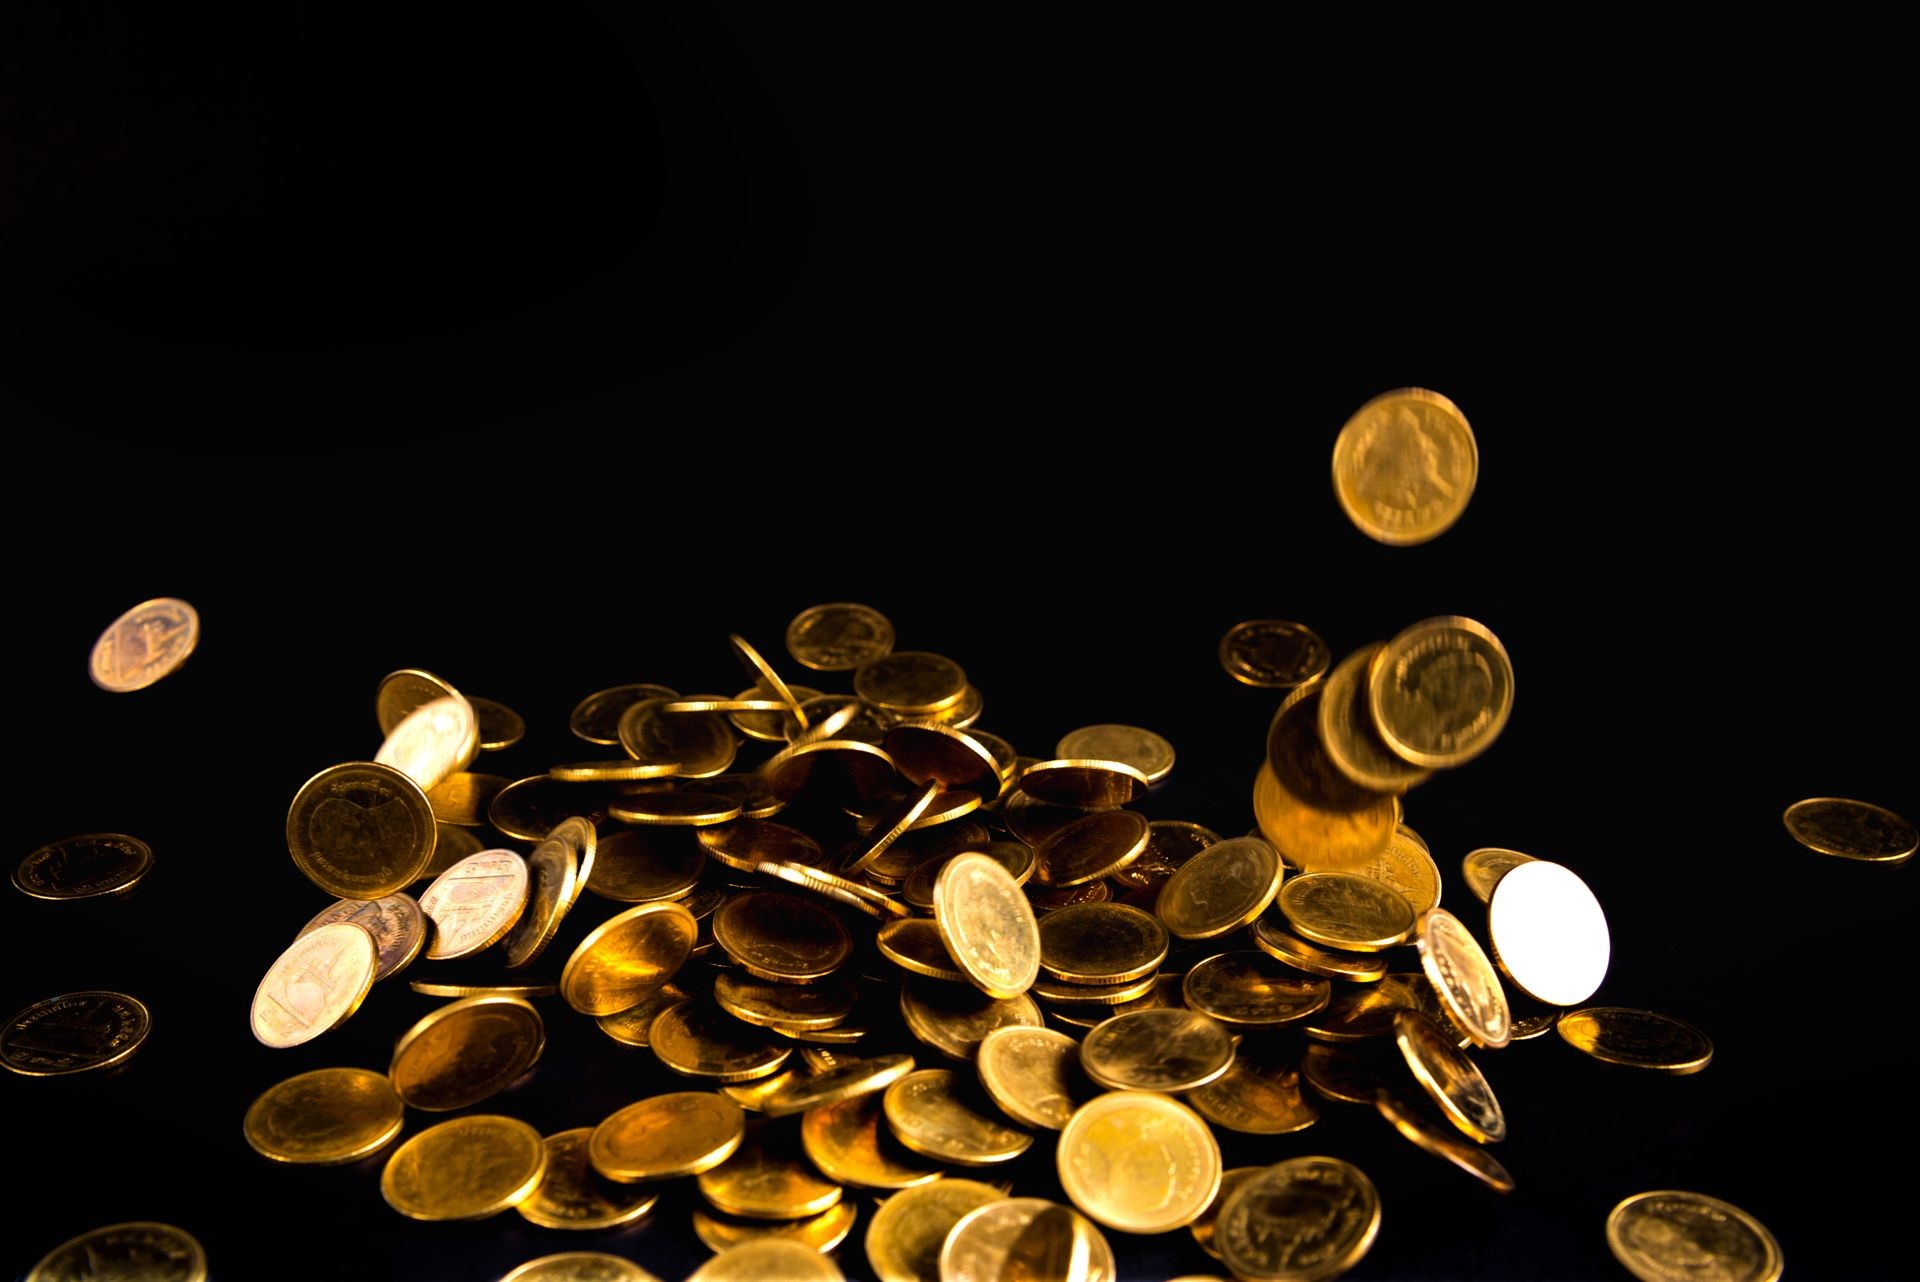 Falling gold coins money in dark background, business concept idea.